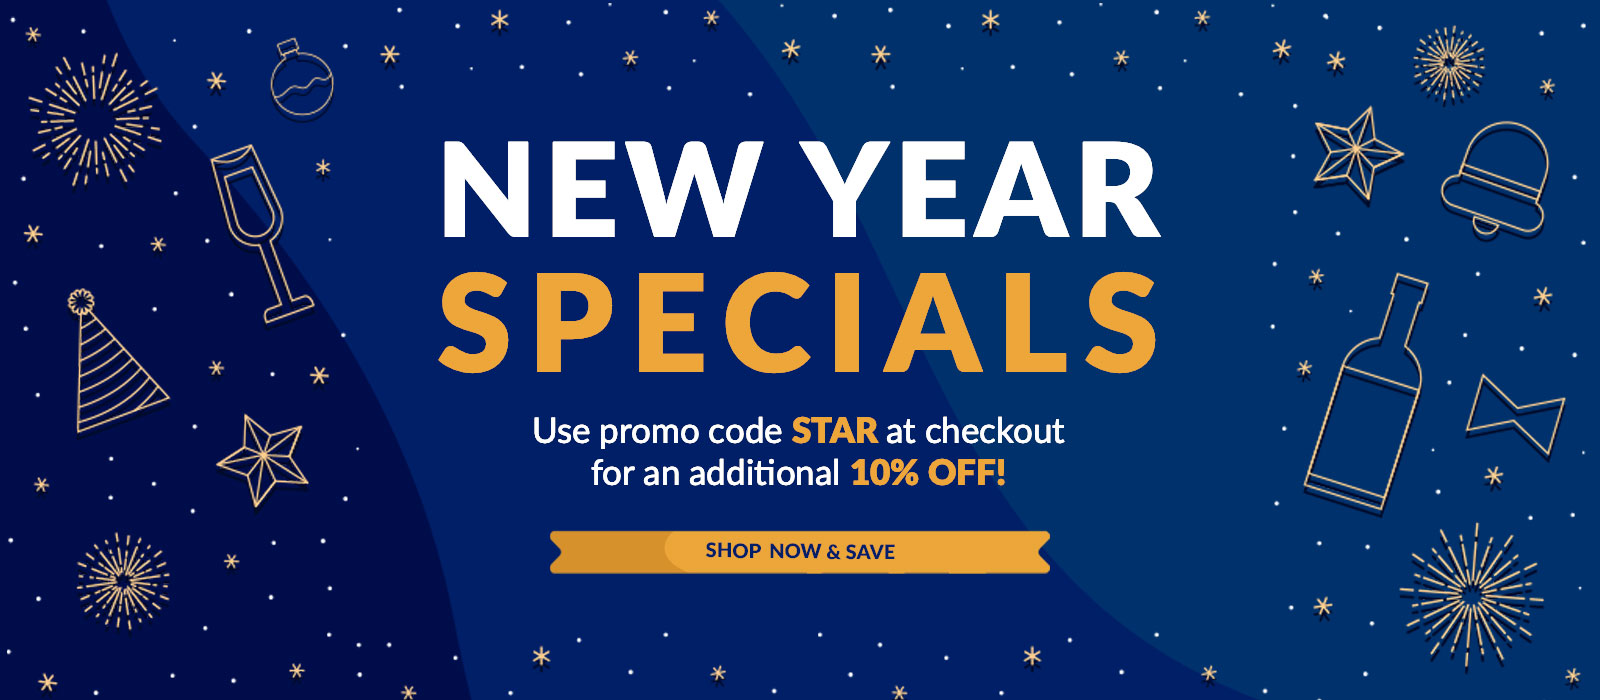 New Years Specials - Promo code STAR for 10% off!